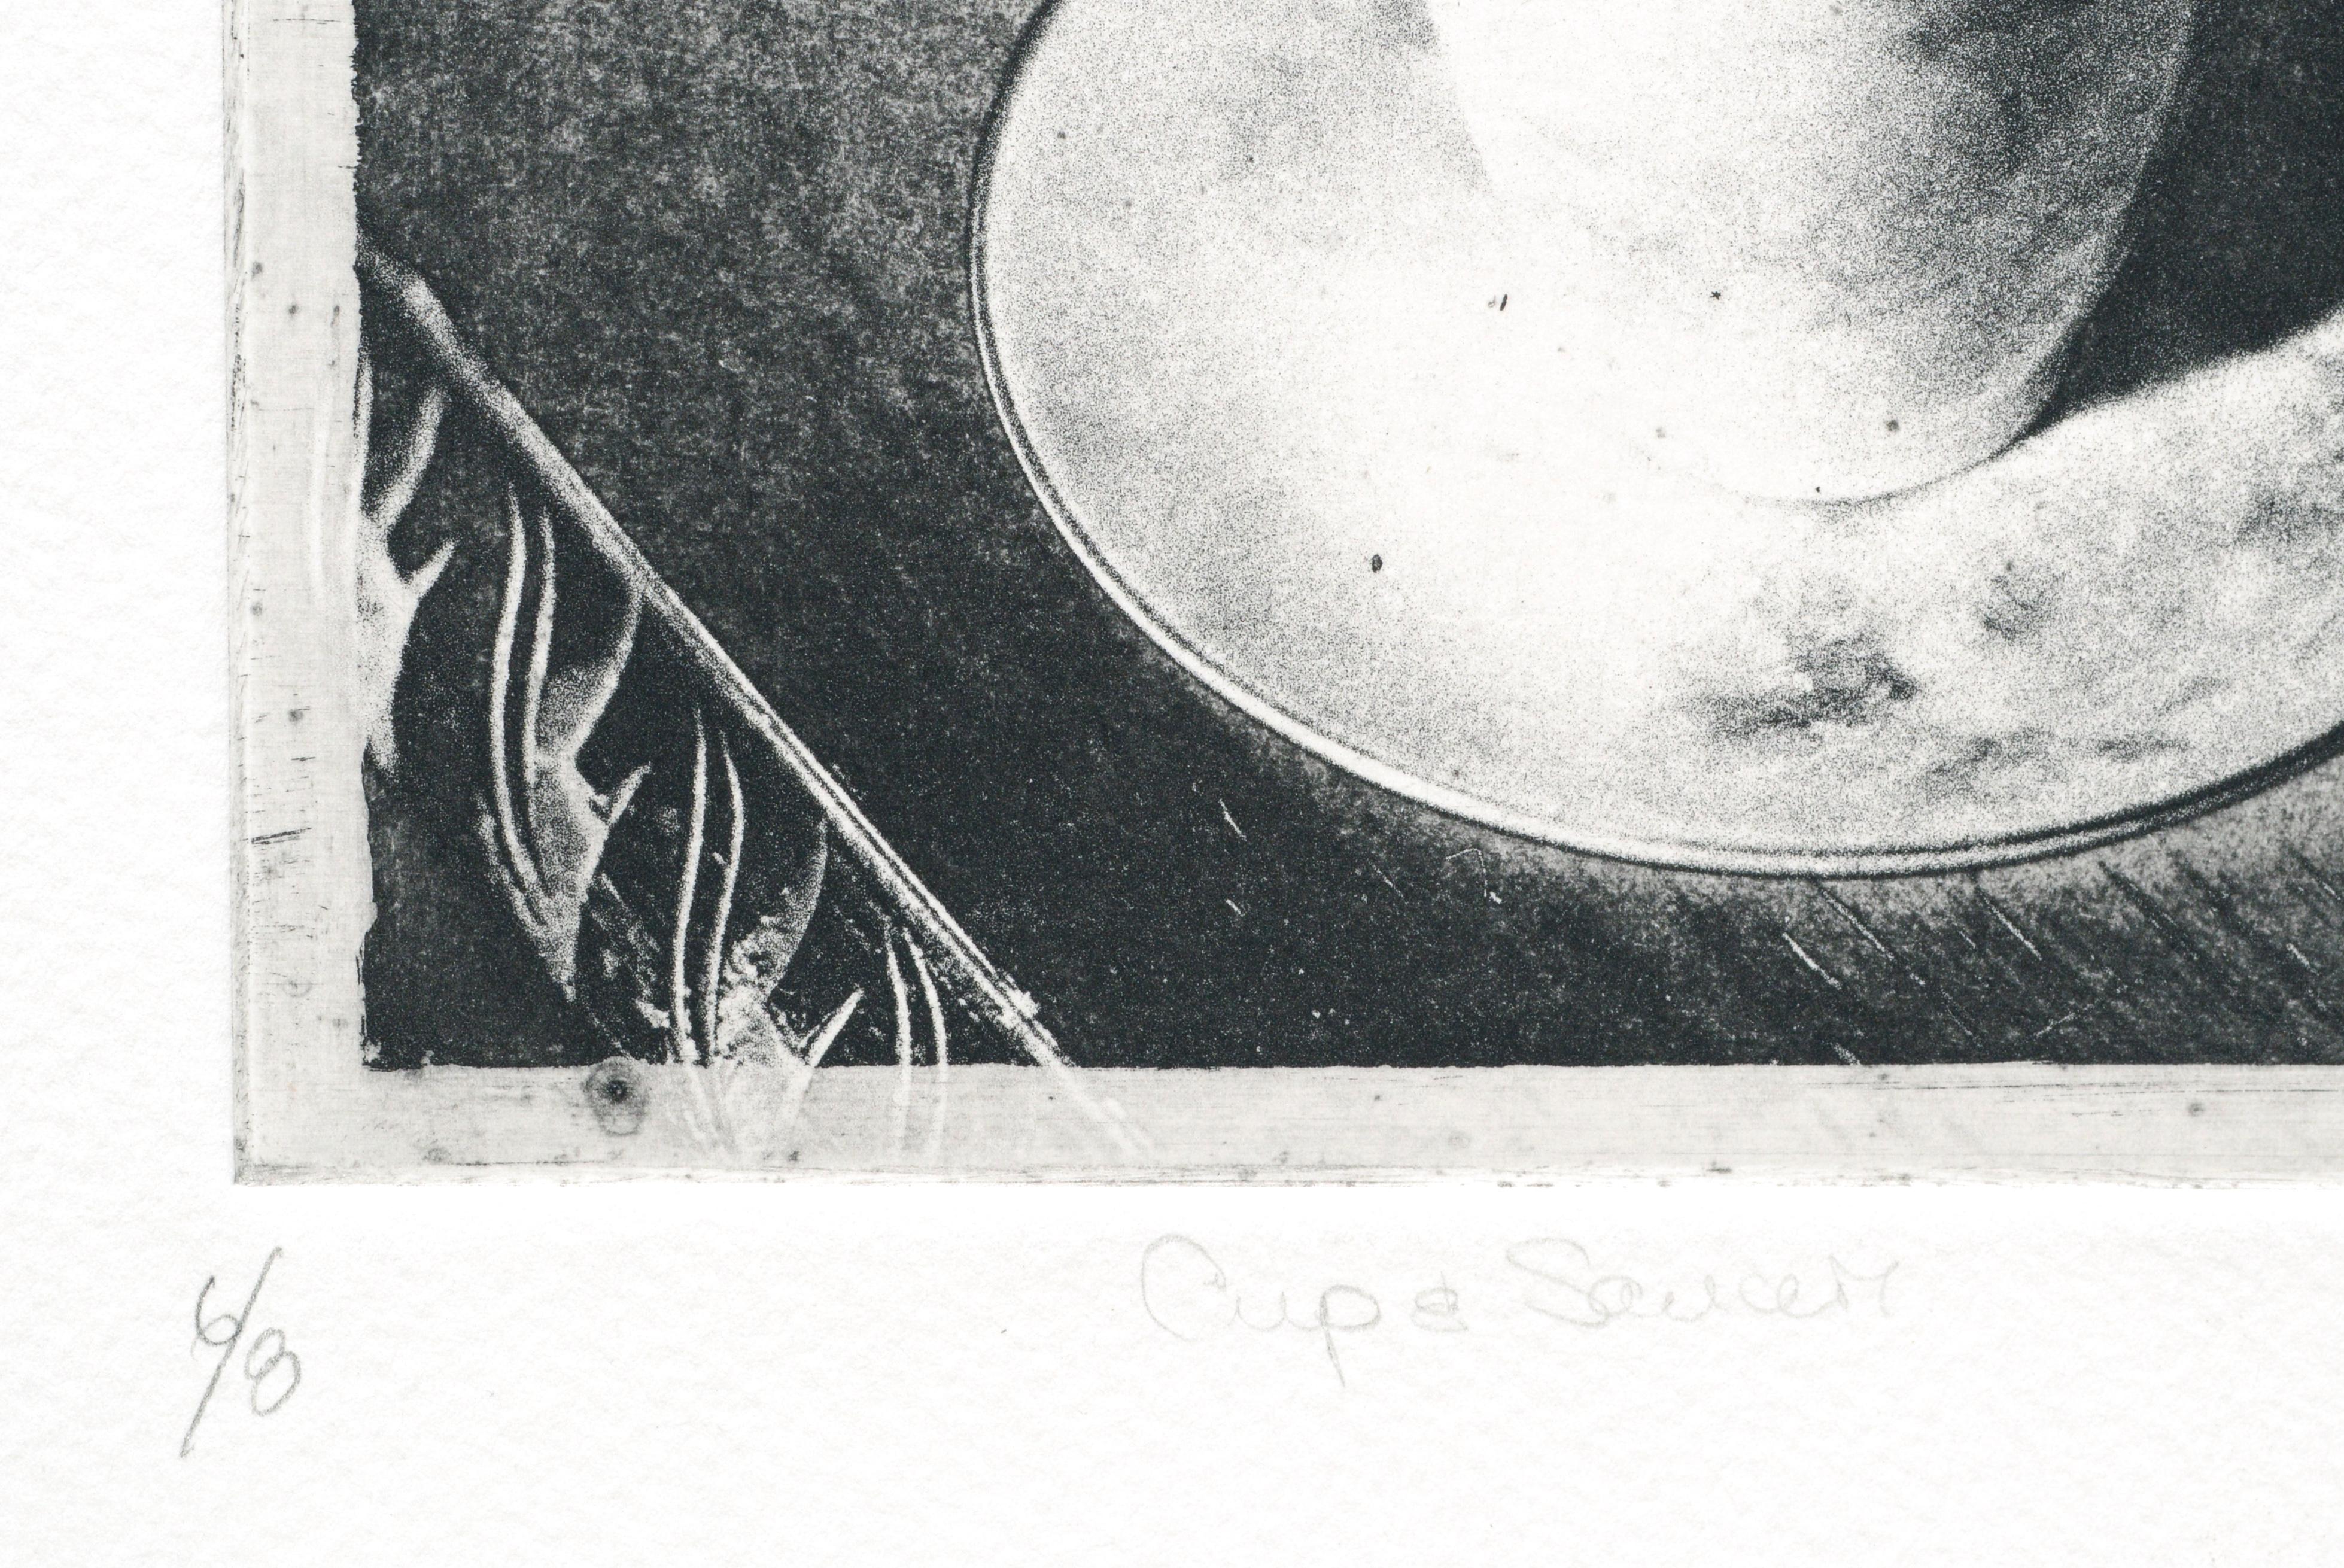 Cup & Saucer (Grandmother's Artifacts), Photo Etching Still-Life  - Realist Print by Claudette McElroy